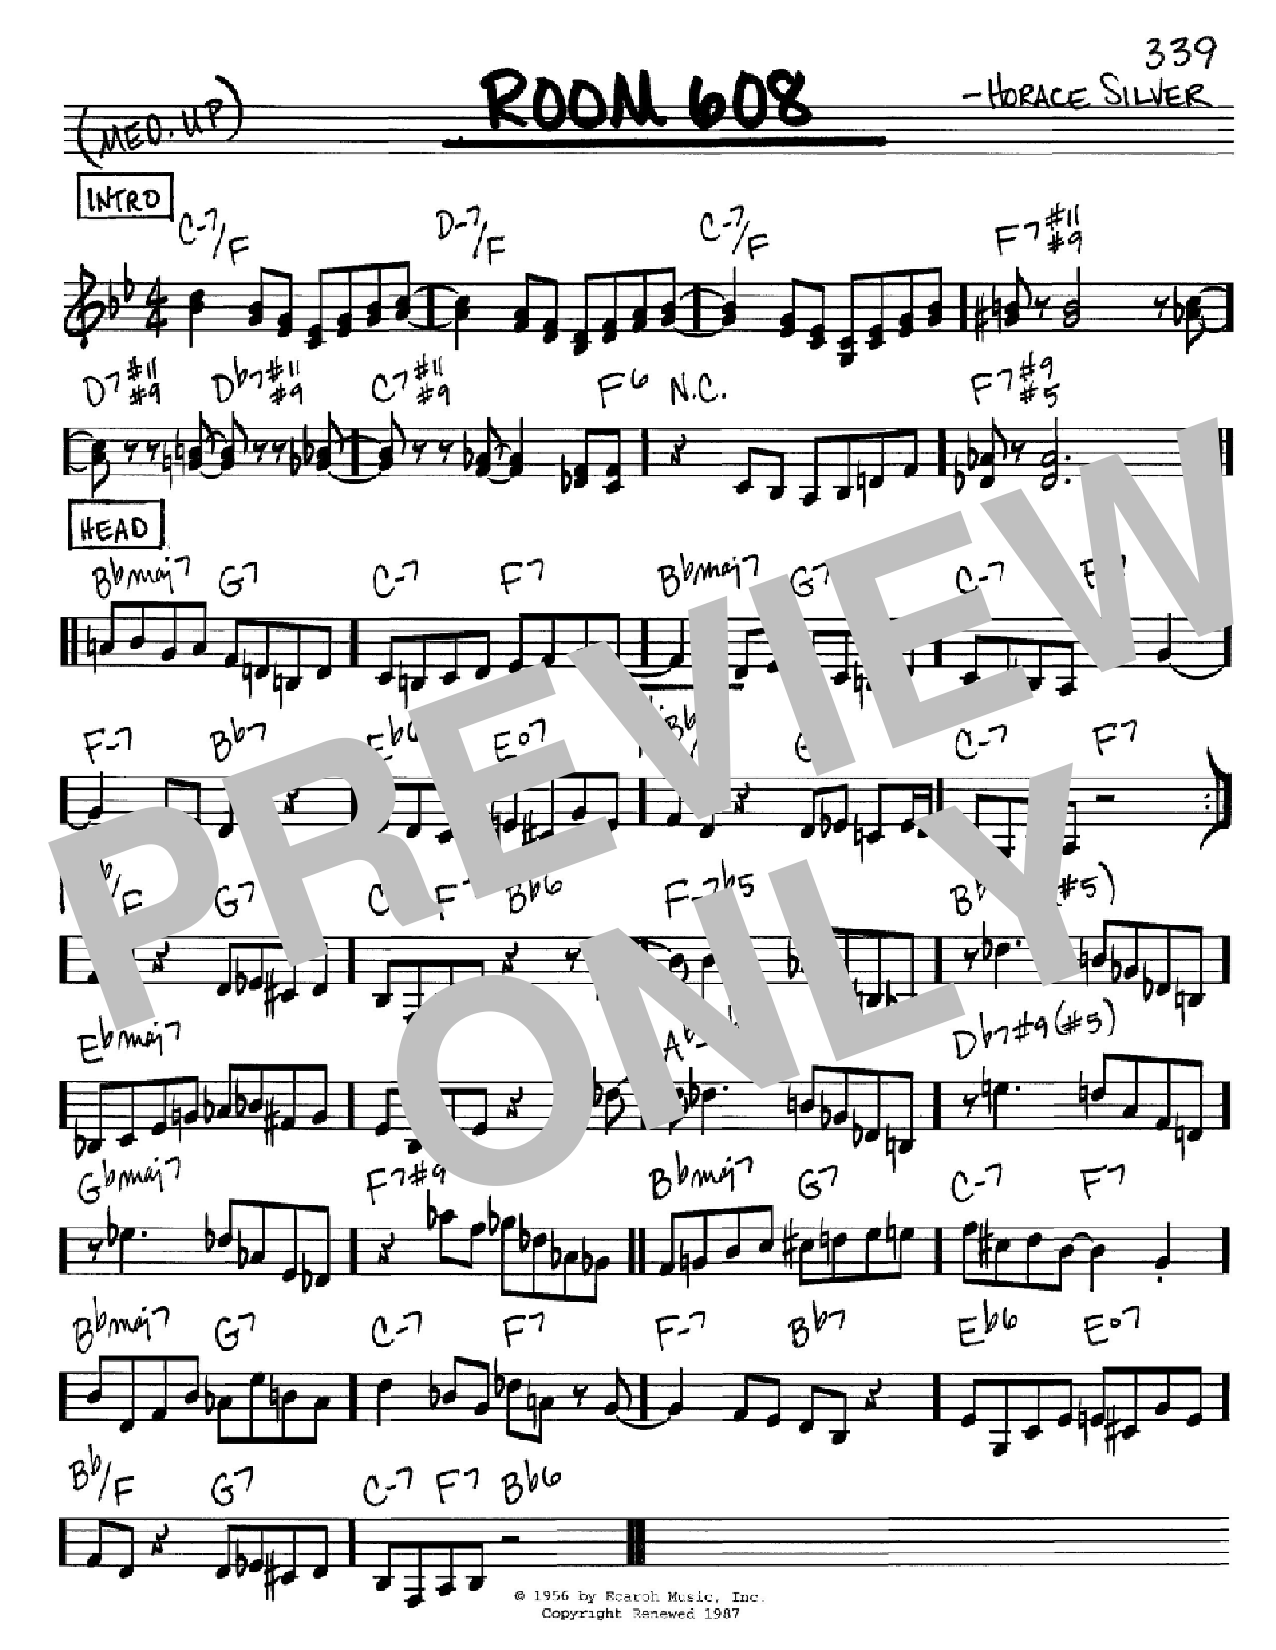 Download Horace Silver Room 608 Sheet Music